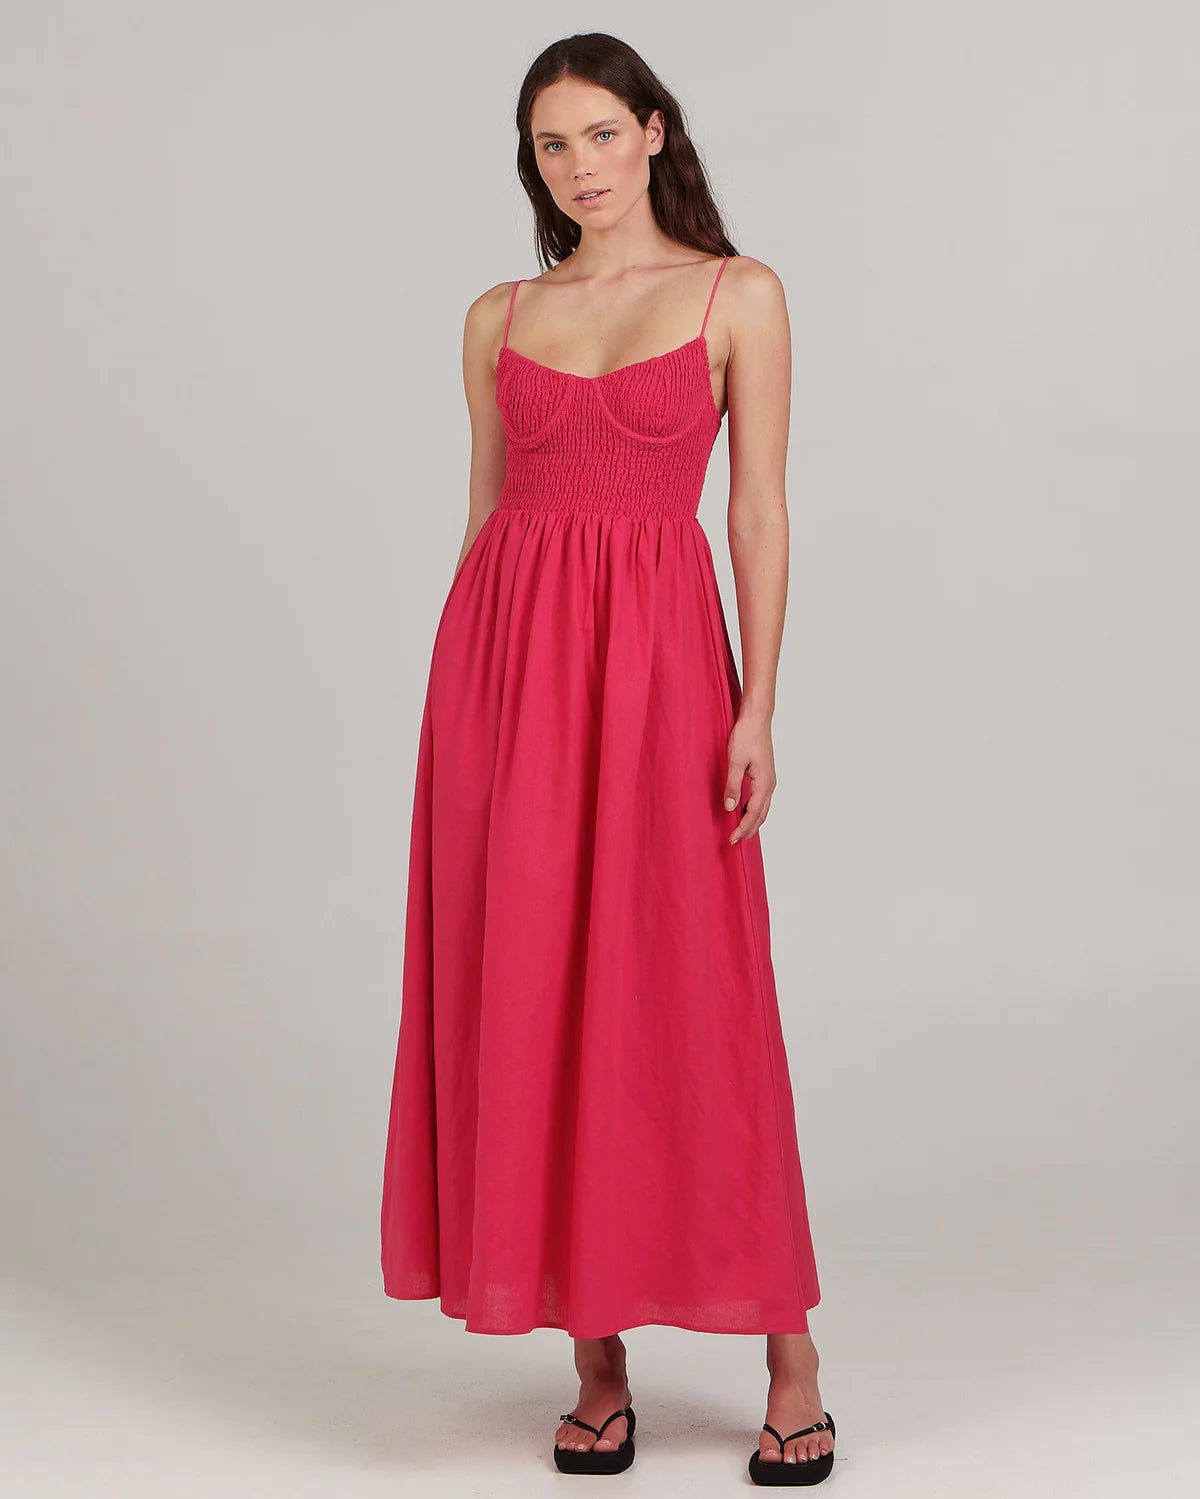 With its fitted bodice and gathered skirt, this linen-blend maxi dress by Charlie Holiday is a beauty in eye-catching fuchsia. Dress it up for cocktails with sky-high heels and a cute clutch.